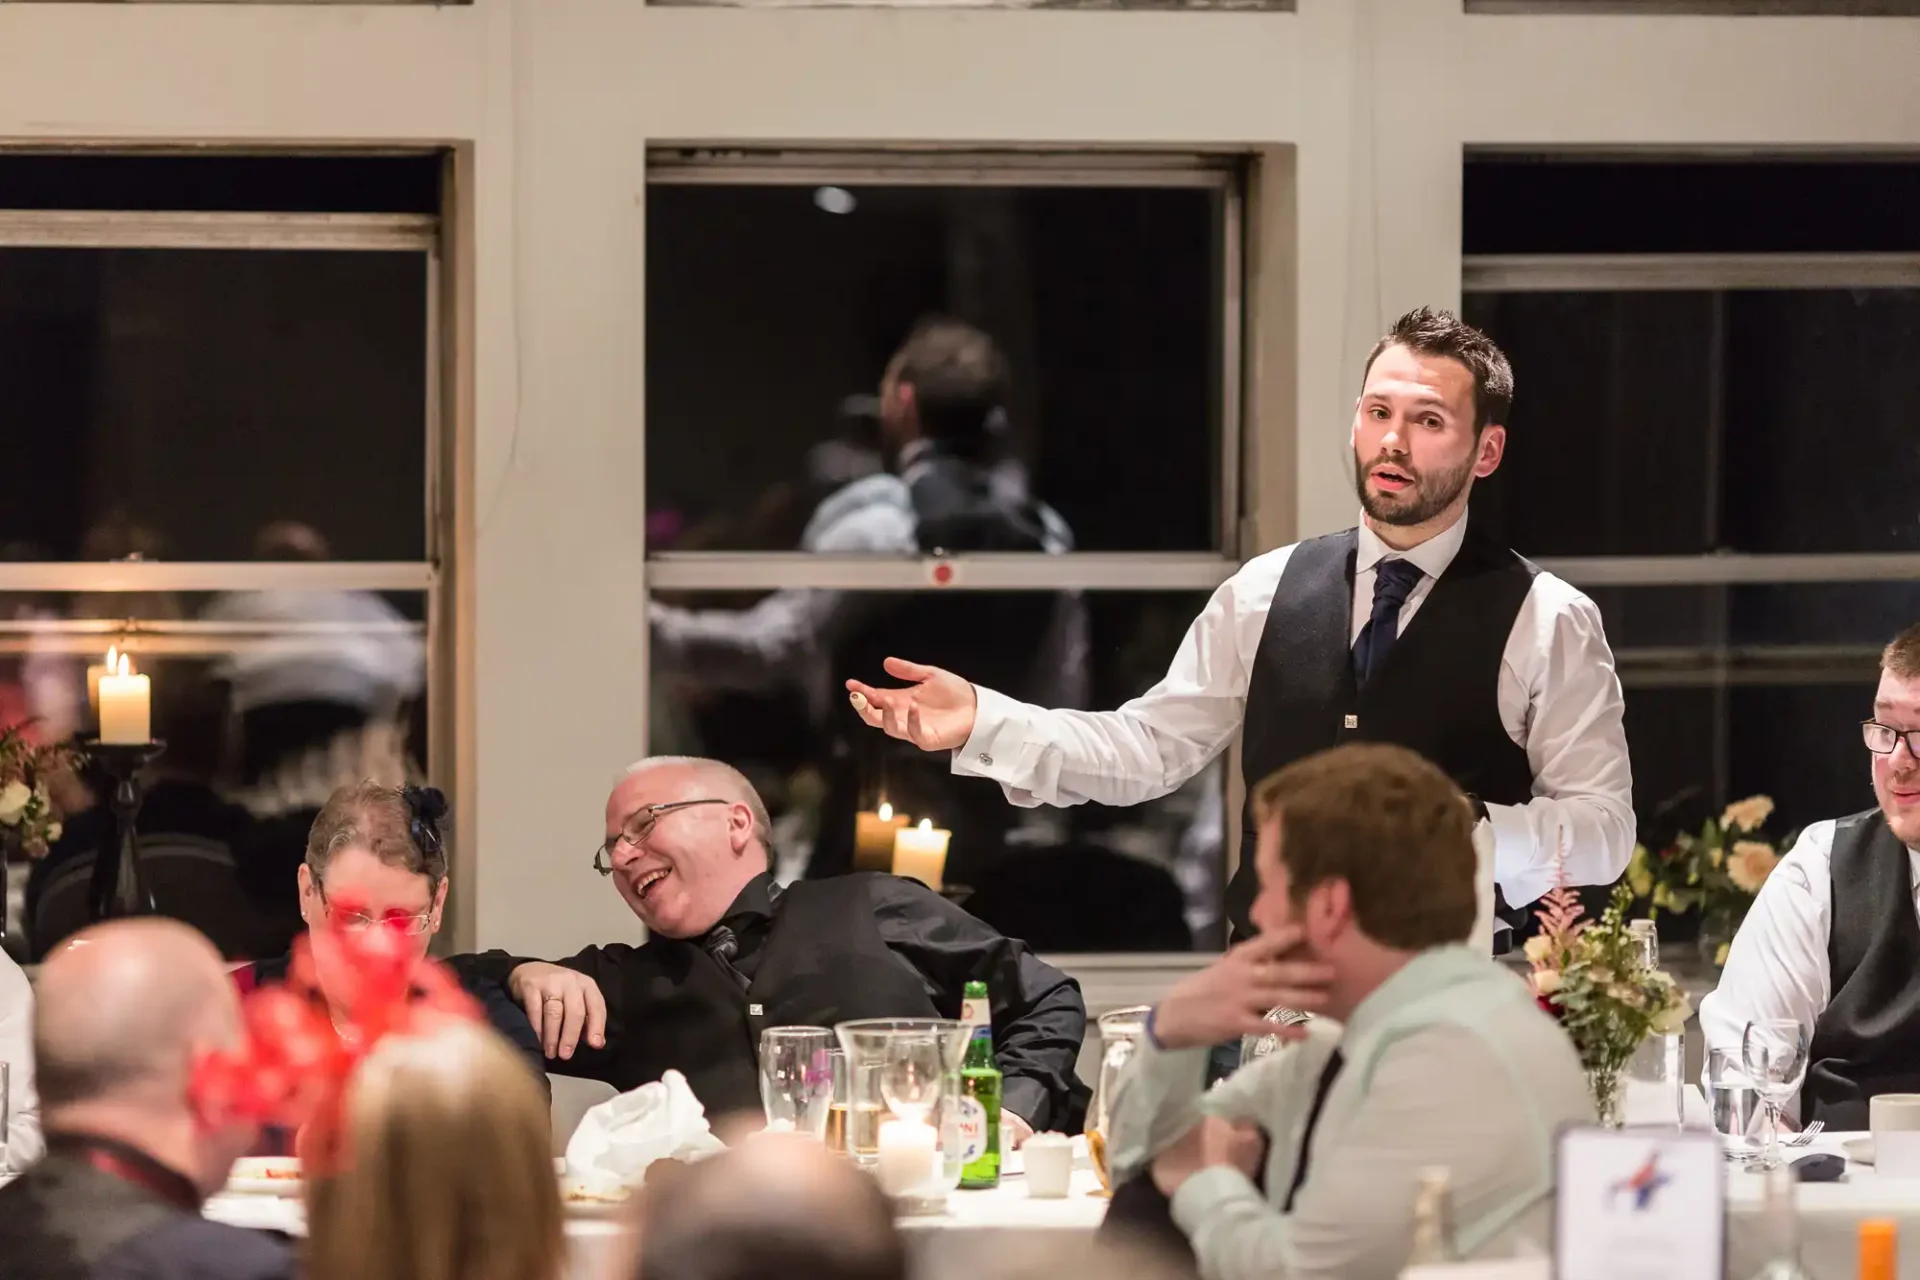 A man in a vest and tie gesturing while speaking at a dinner event, with guests seated at tables, some laughing and engaging with him.